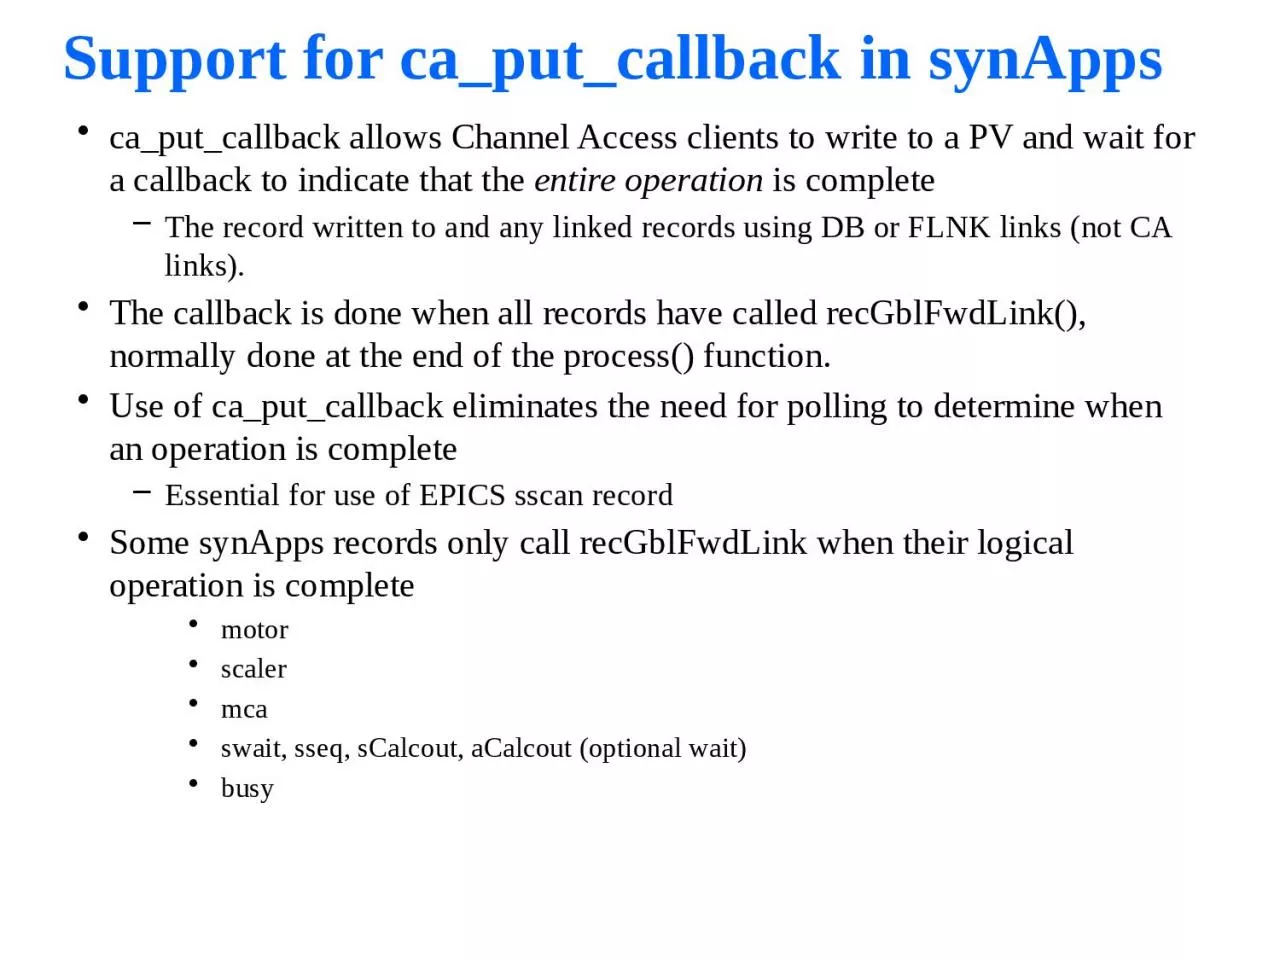 ca_put_callback  allows Channel Access clients to write to a PV and wait for a callback